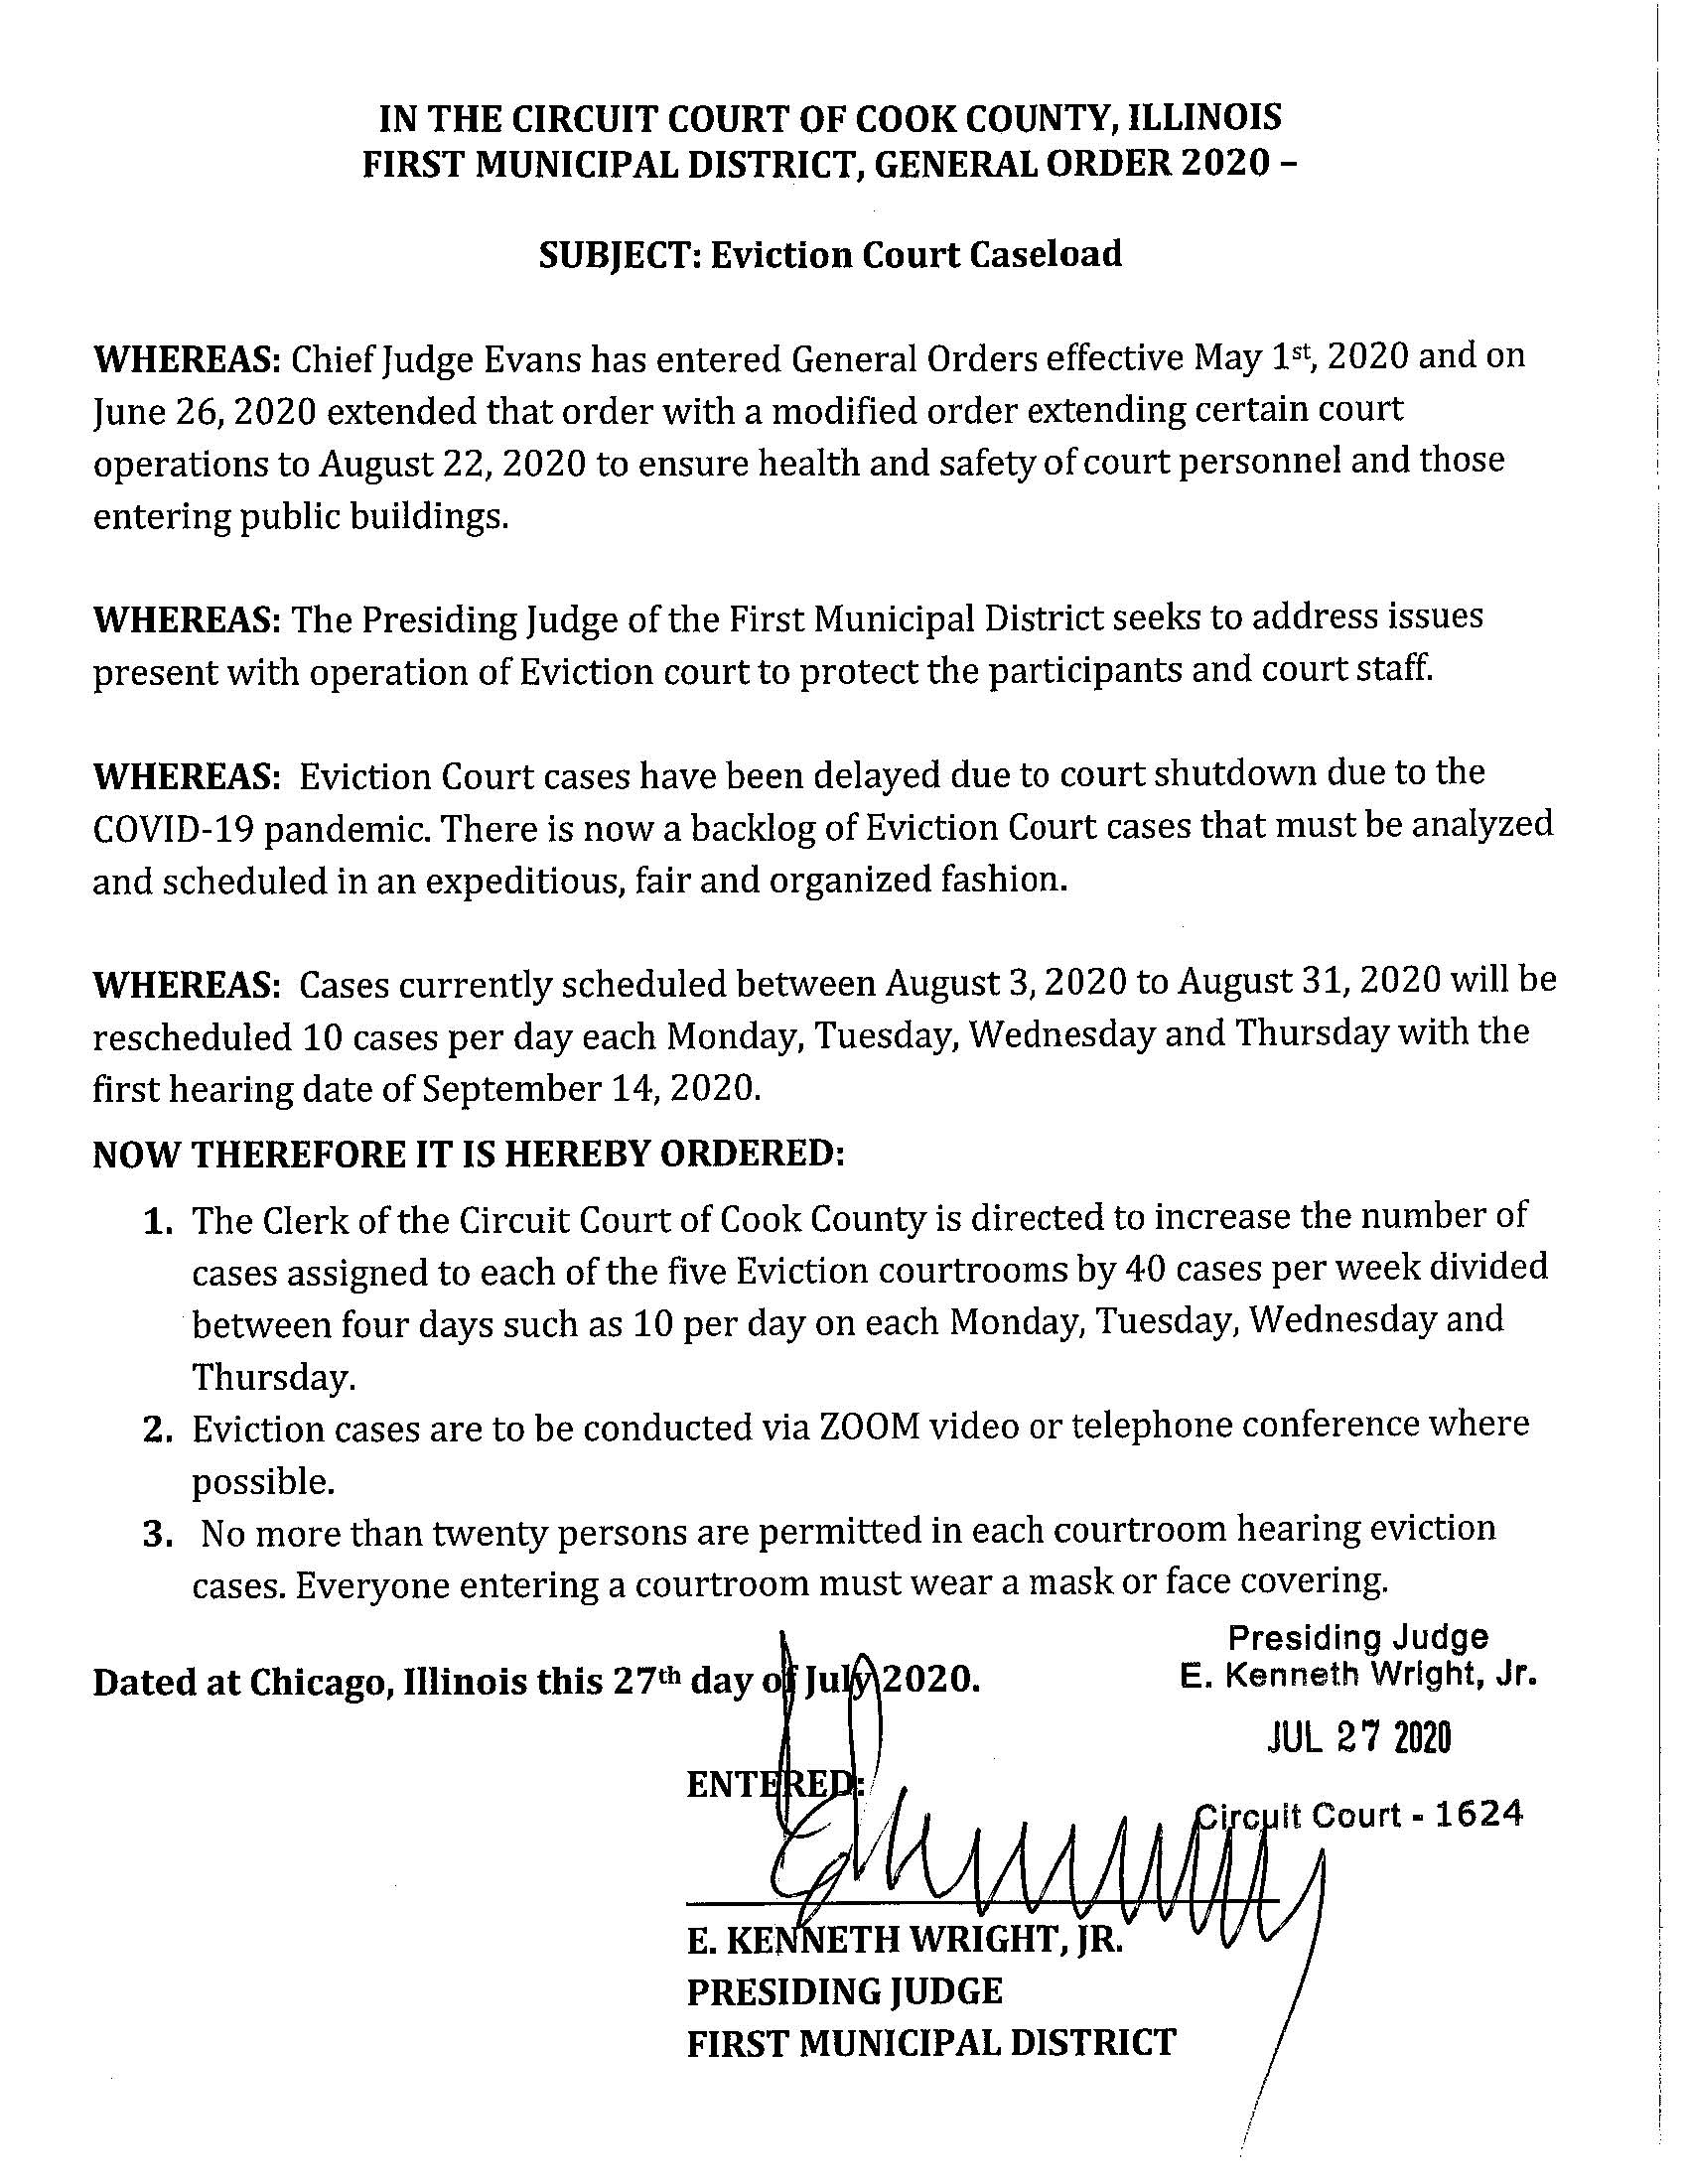 No Cook County Eviction Cases until September? Chicago Eviction